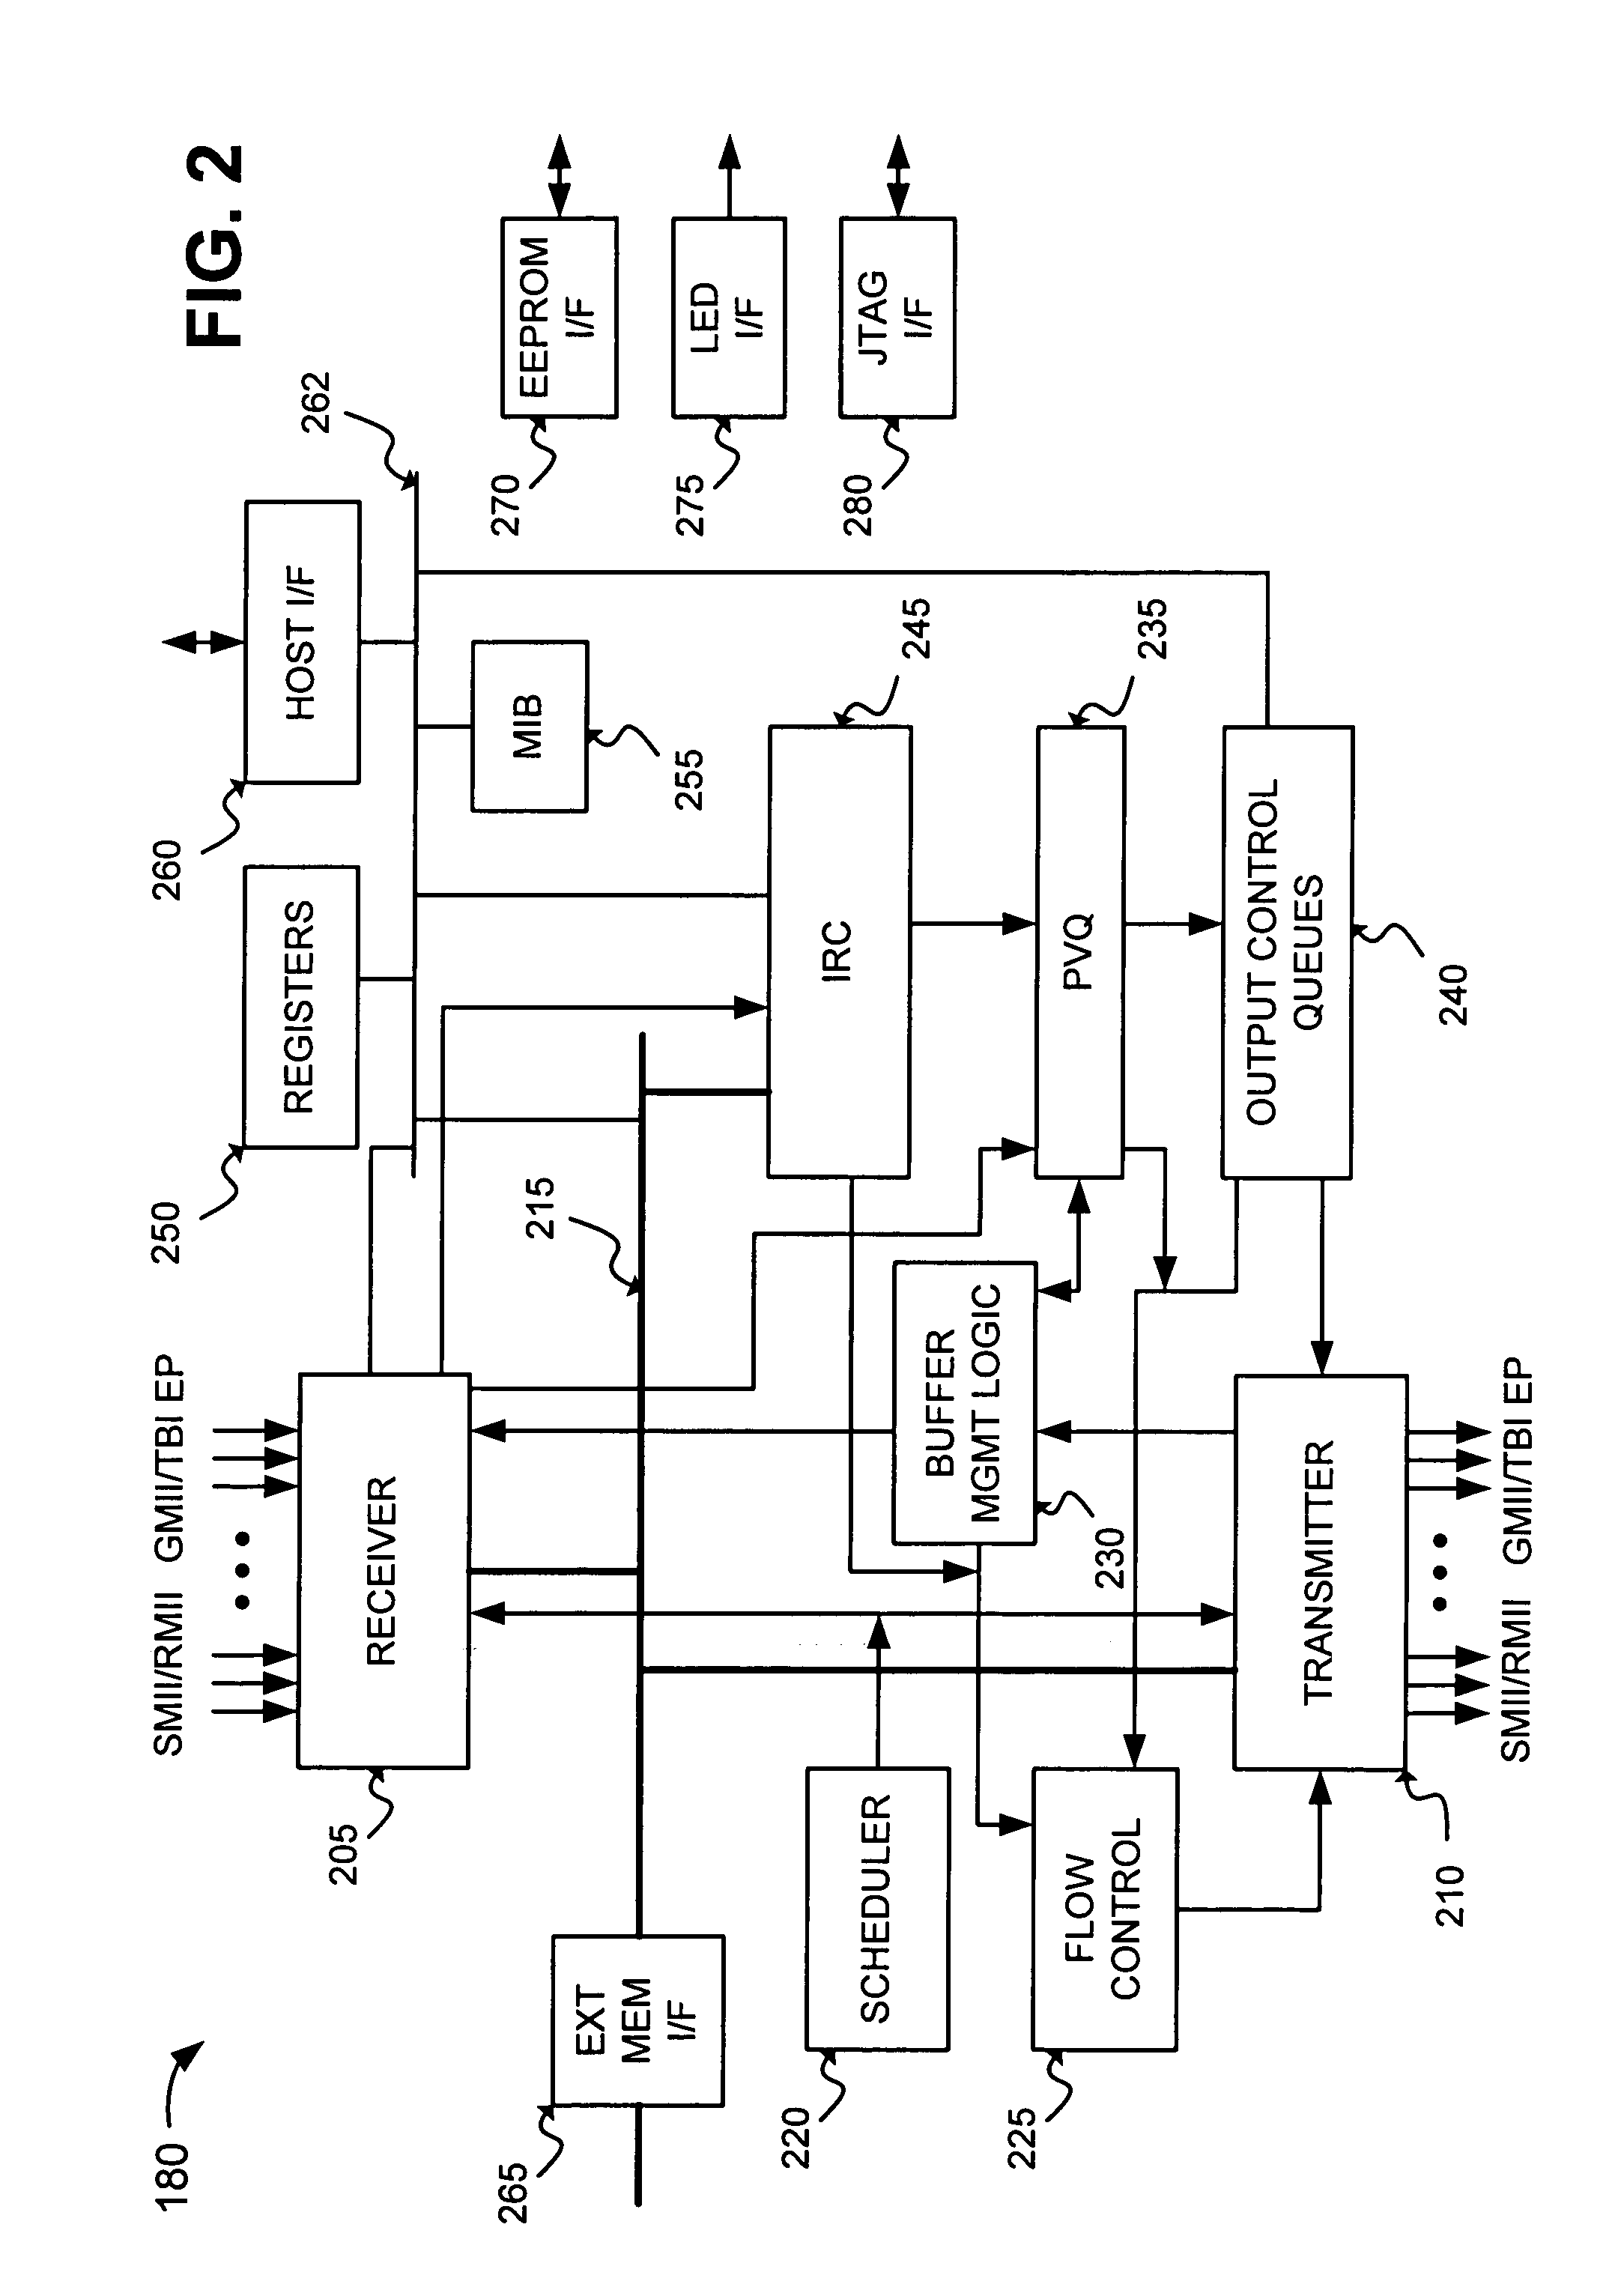 System and method for dynamically updating weights of weighted round robin in output queues